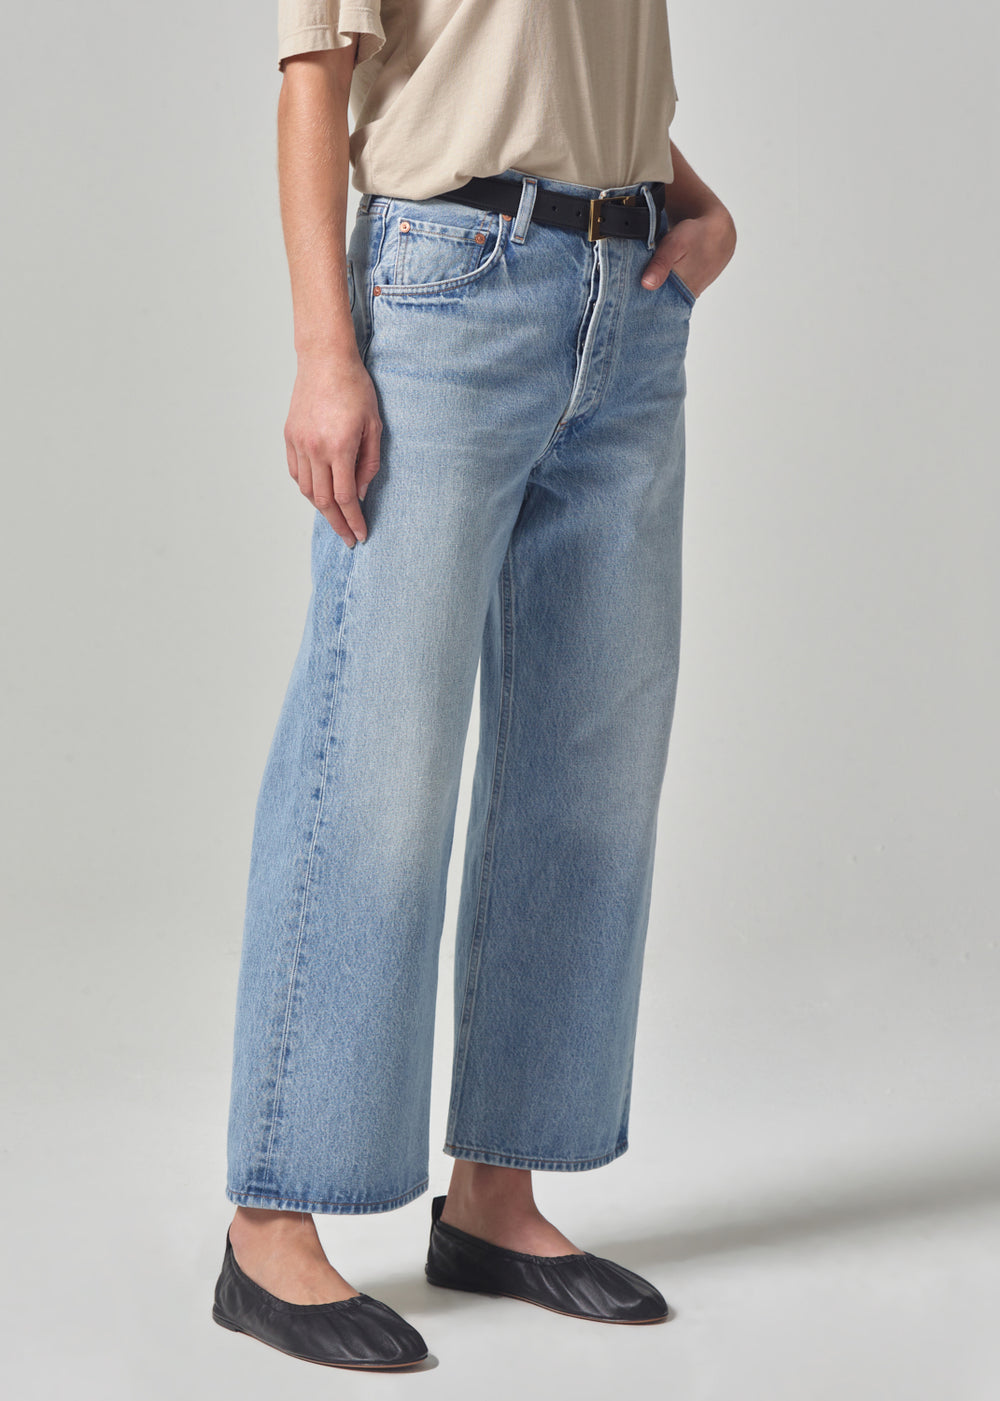 Citizens of Humanity Vintage Gaucho in Misty